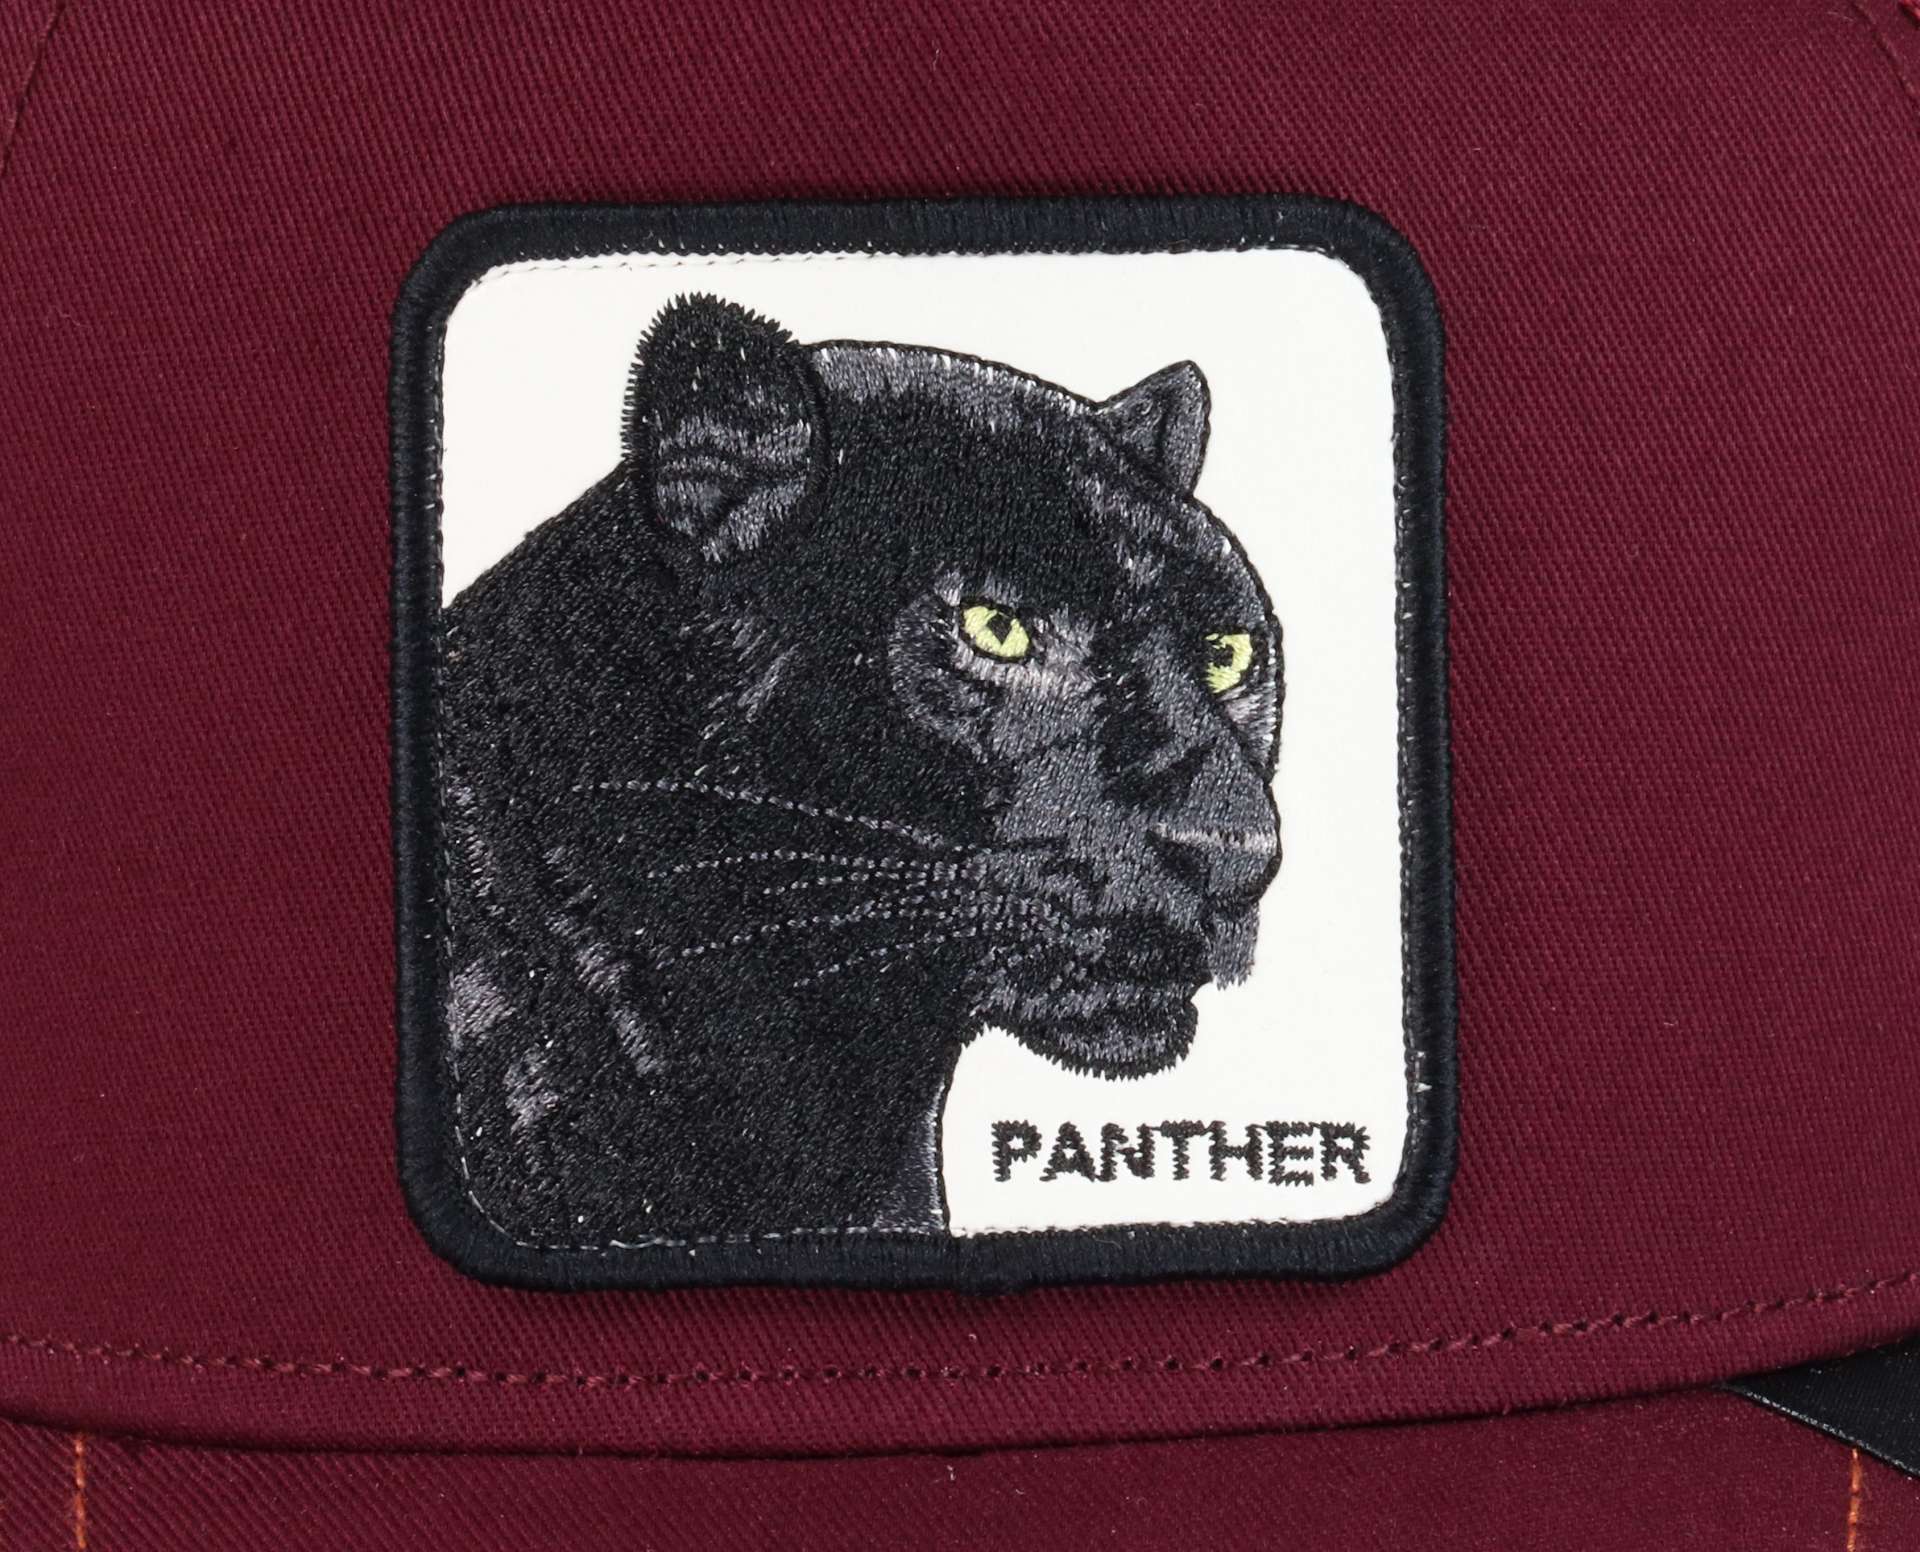 The Panther Maroon A-Frame Adjustable Trucker Cap Goorin Bros